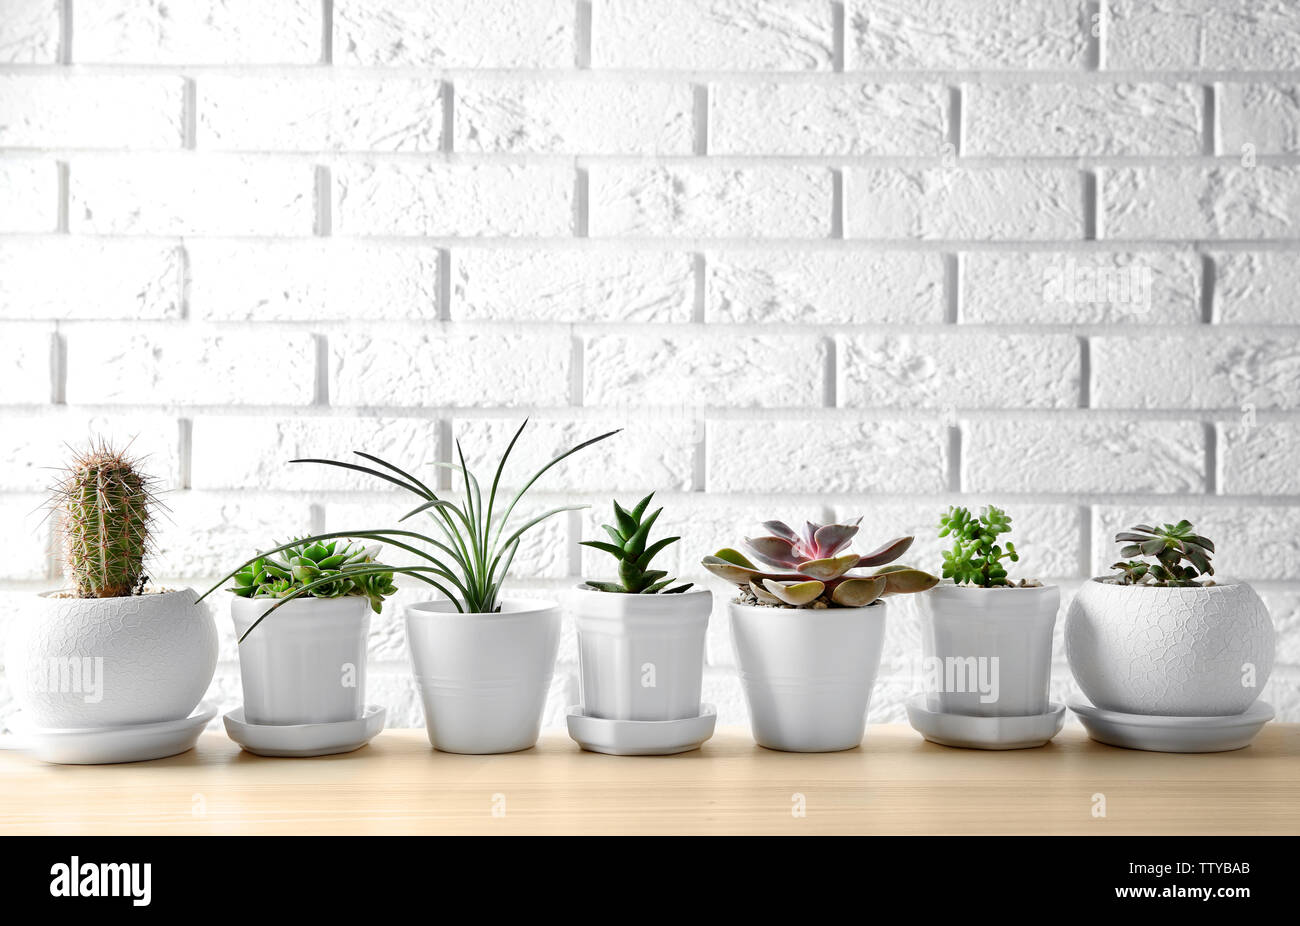 Pots with succulents on table against brick wall background Stock Photo